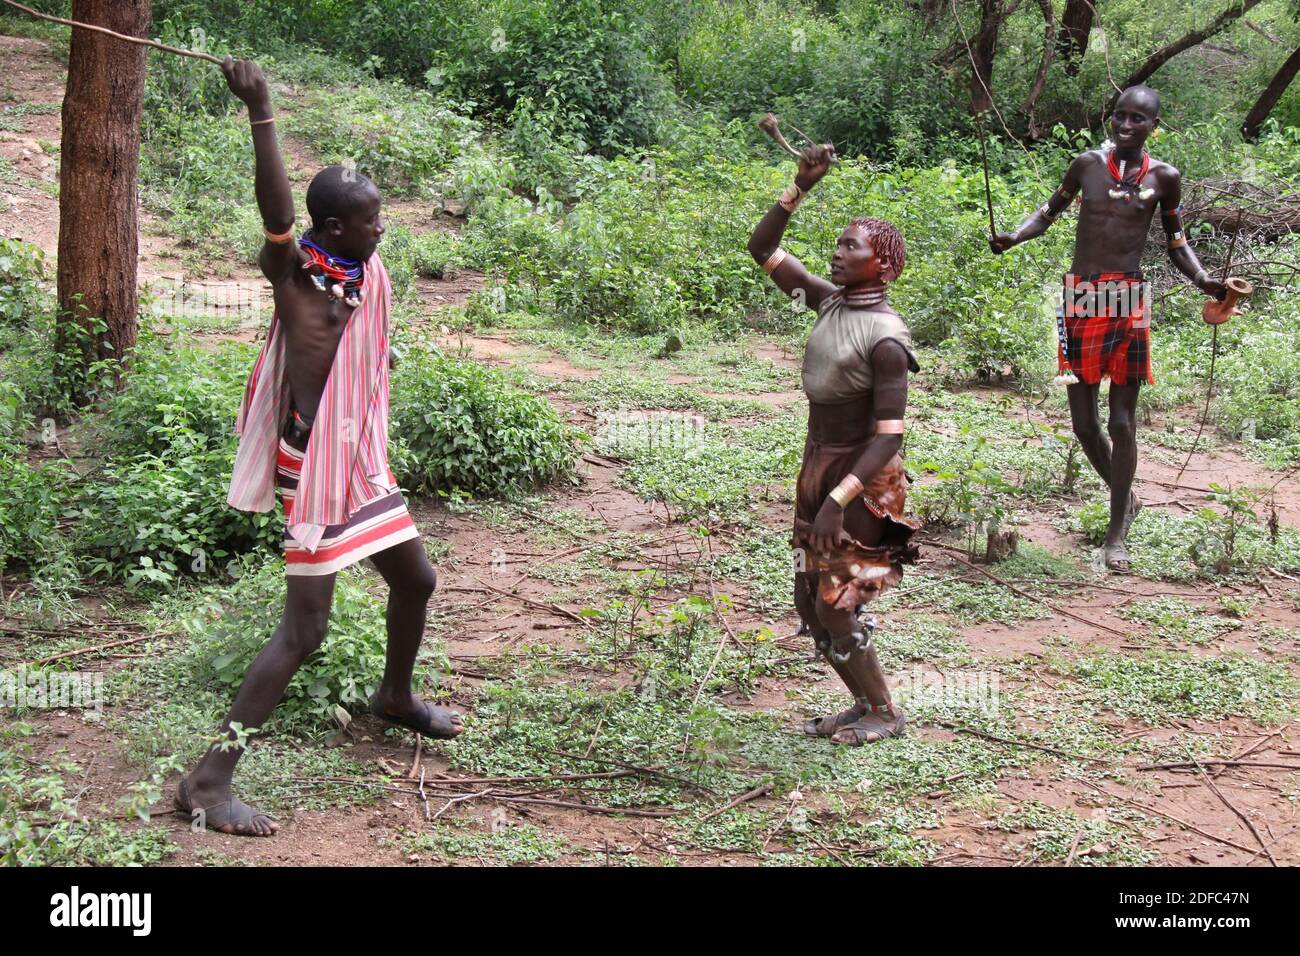 A Hamar Tribesman Whipping Young Hamar Women. The Young Women Ask To be  Whipped To Show Love For A Family Member Who Is Taking Part In A coming  of a - SuperStock